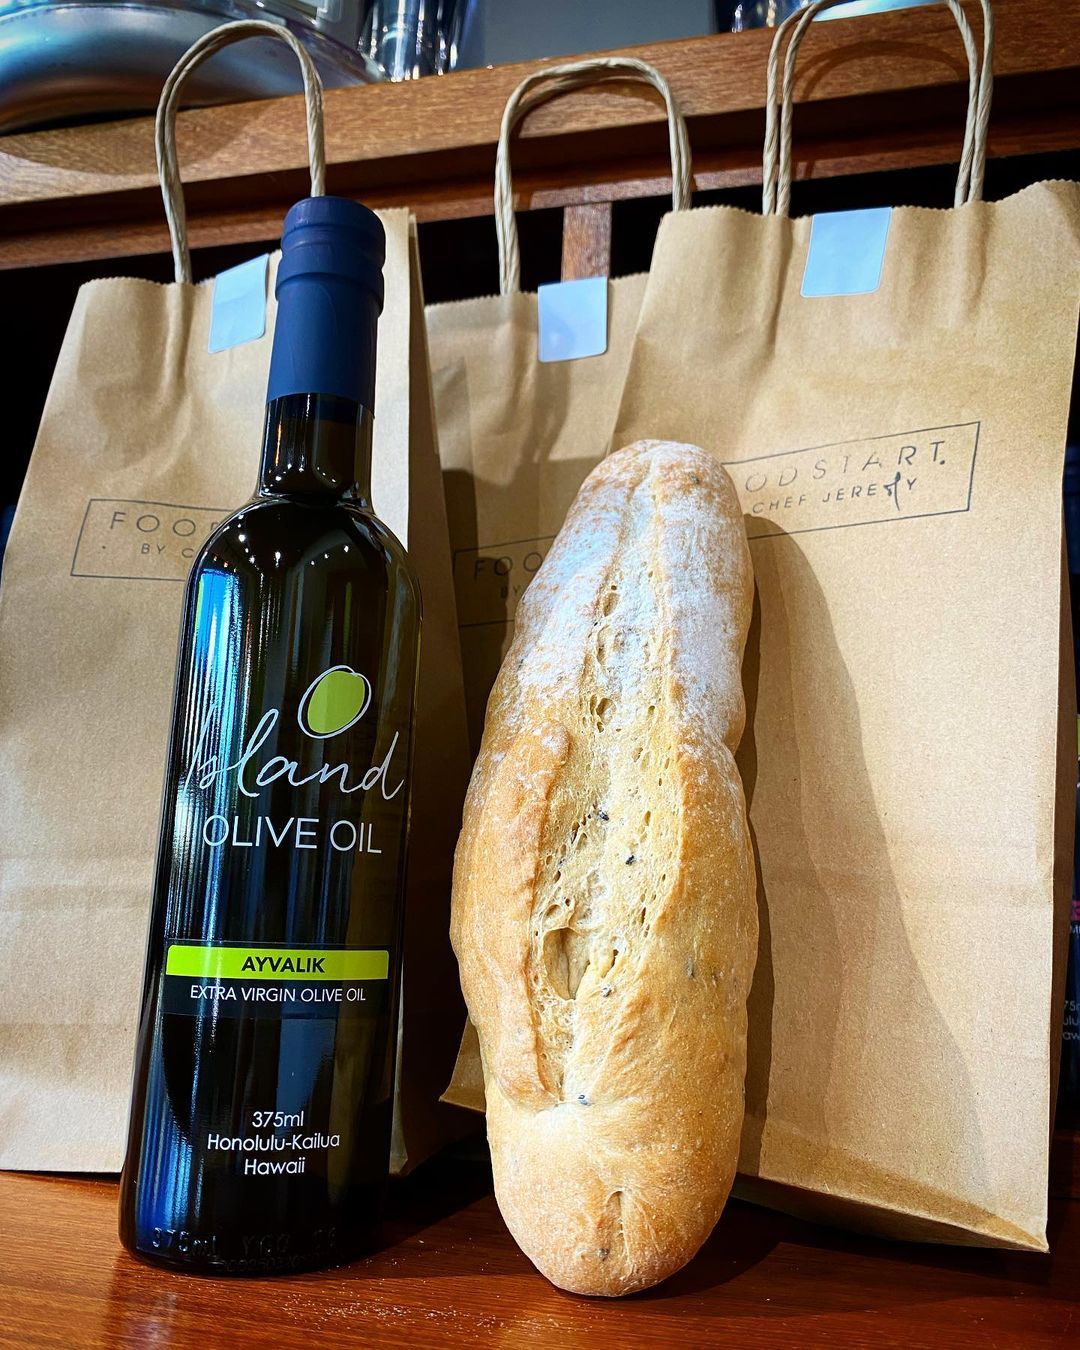 Happy Aloha Friday! What better way to celebrate than with some freshly baked bread by Chef Jeremy — complimentary with your qualifying purchase at Island Olive Oil on Fridays!